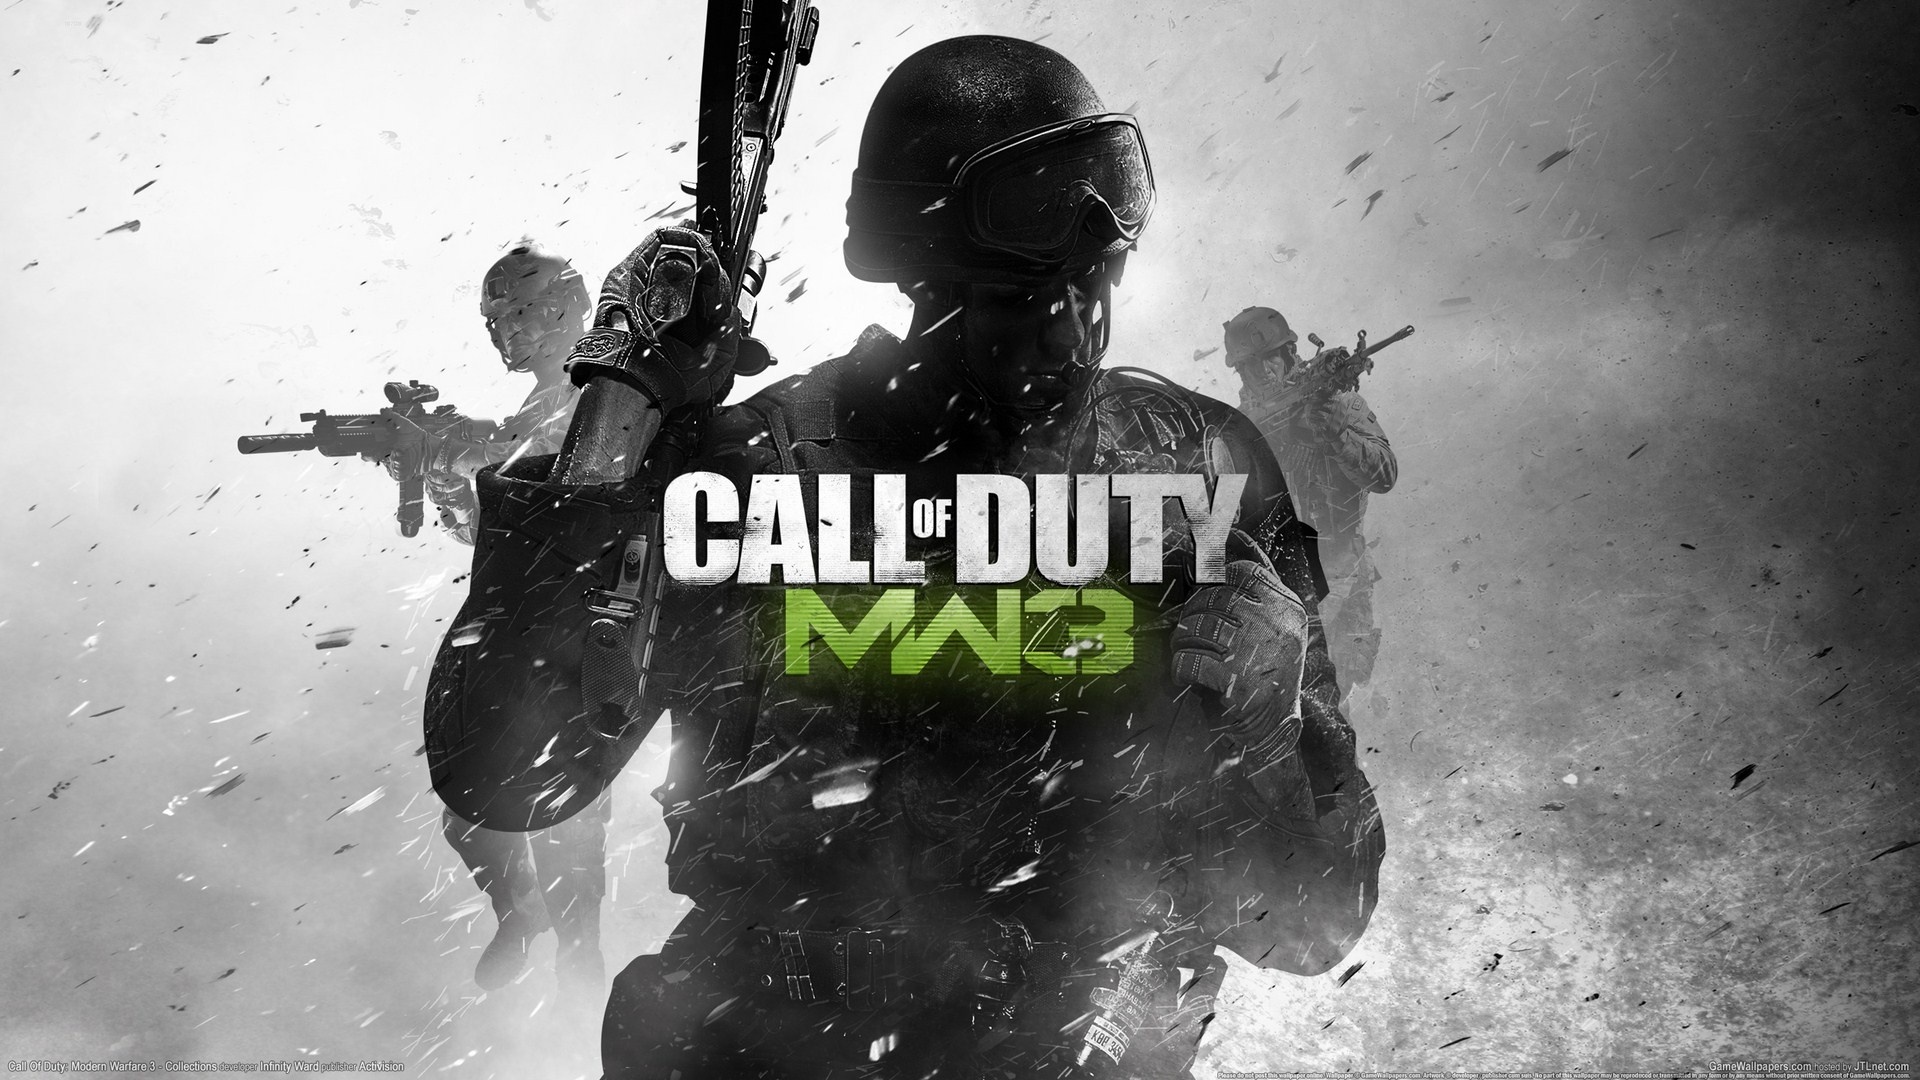 761569 Call Of Duty Modern Warfare 3 Wallpapers | Games Backgrounds